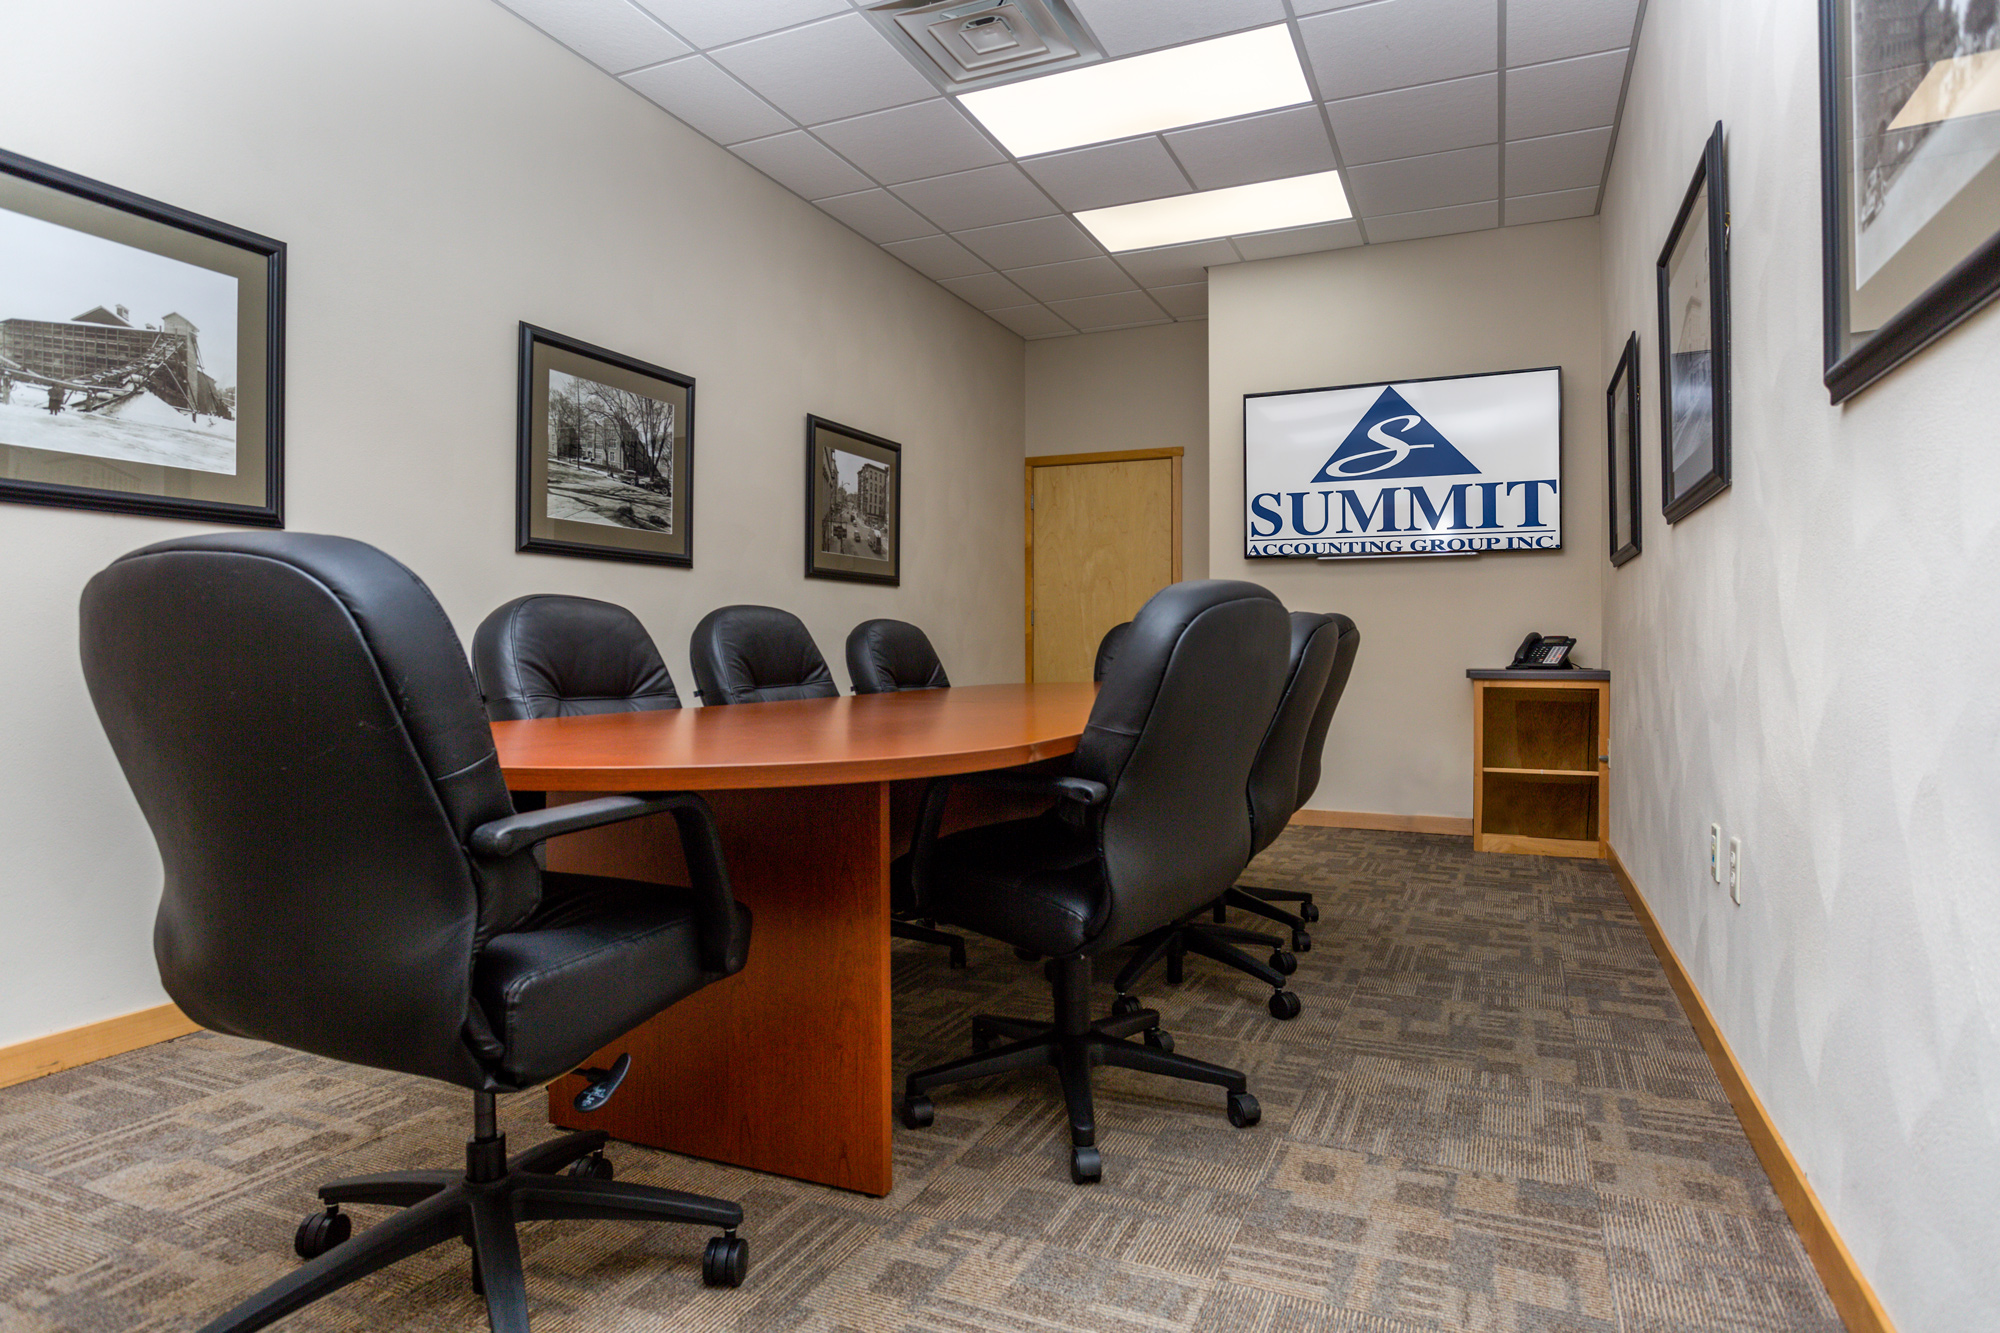 Welcome to Summit Accounting